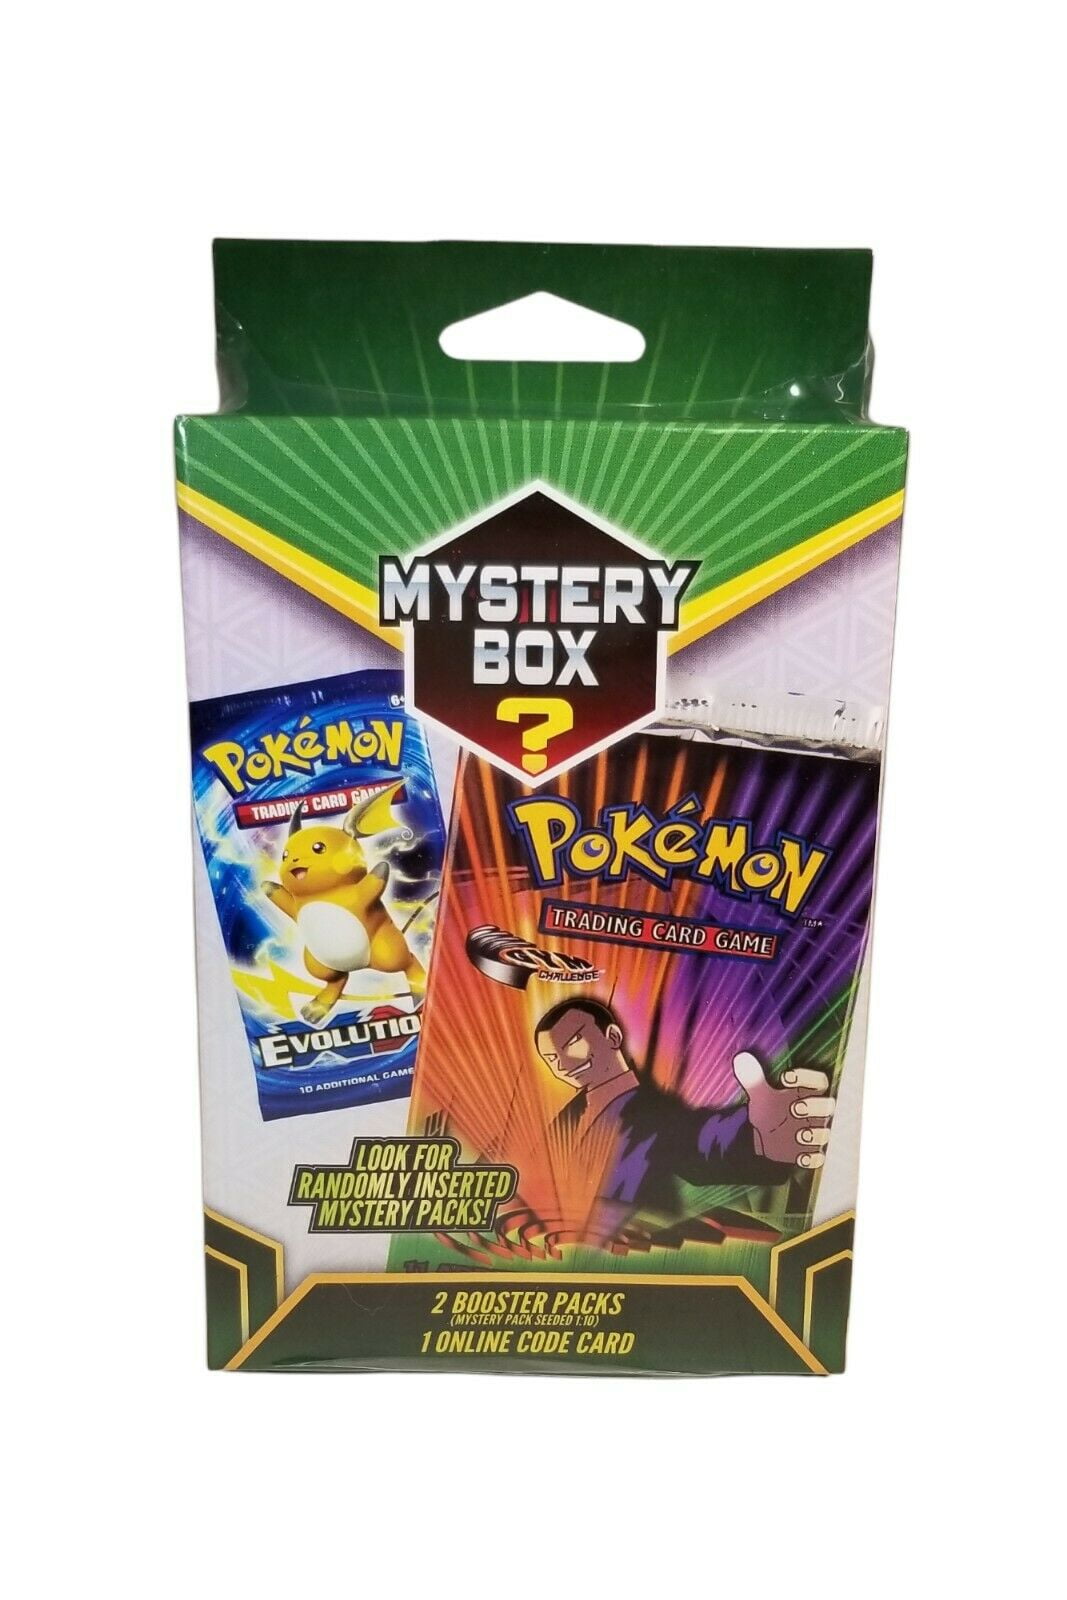 Pokemon Mystery box Guarantees 2 Booster Packs with more suprises Included! 